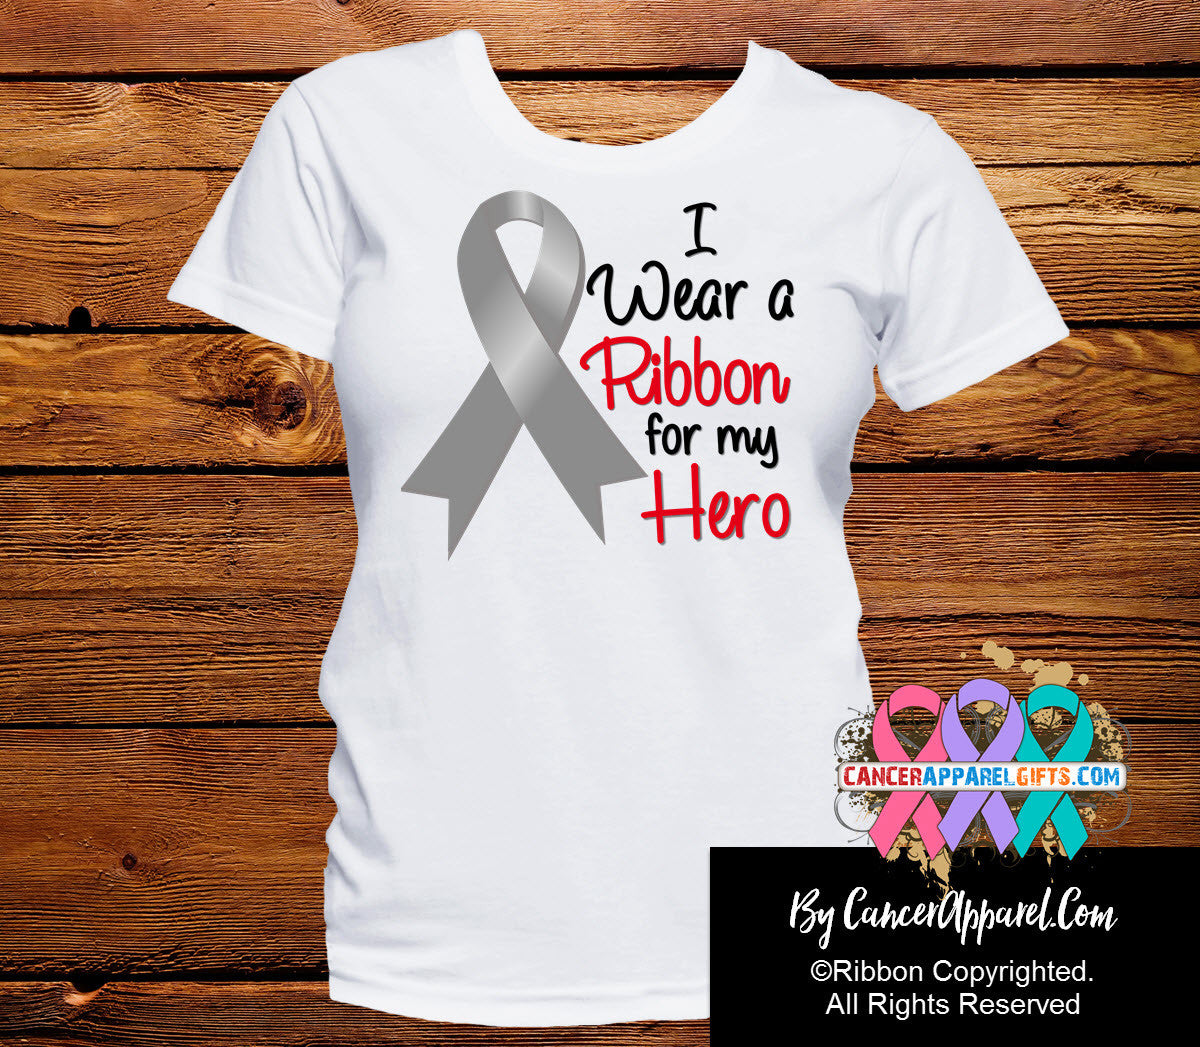 Brain Cancer For My Hero Shirts - Cancer Apparel and Gifts